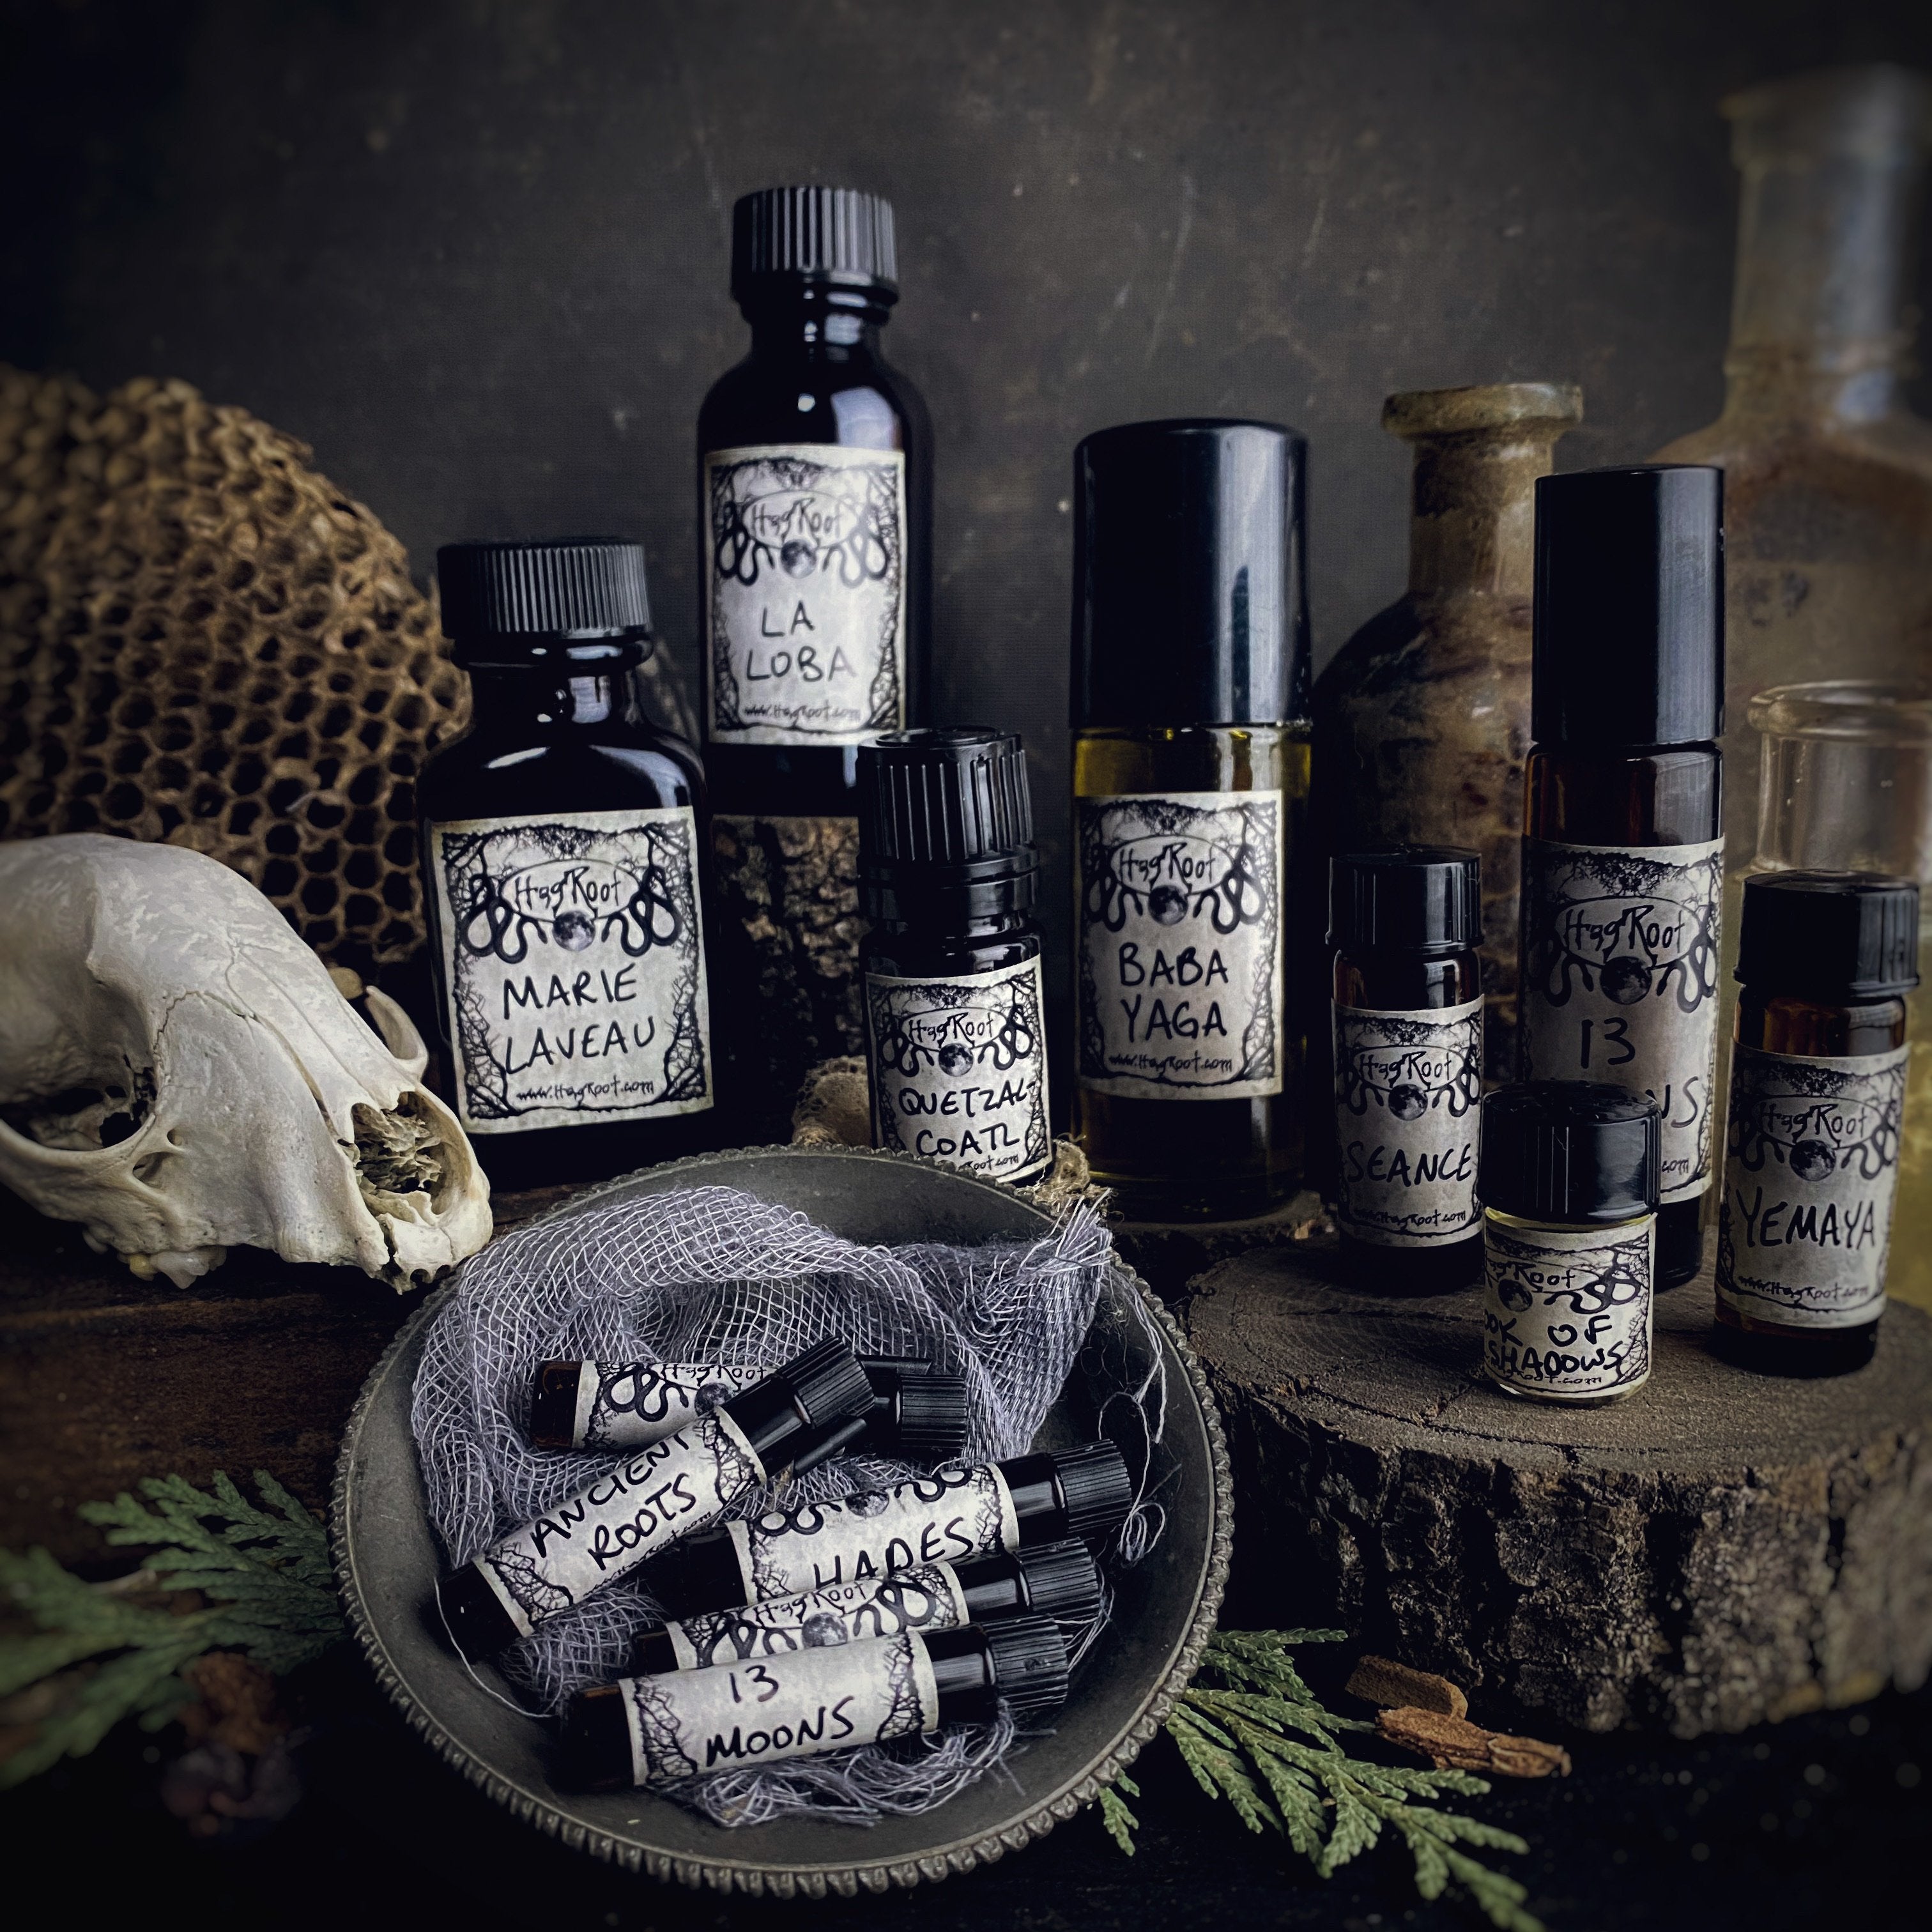 HADES-(Charred Wood, Tobacco, Amber, Leather, Myrrh)-Perfume, Cologne, Anointing, Ritual Oil